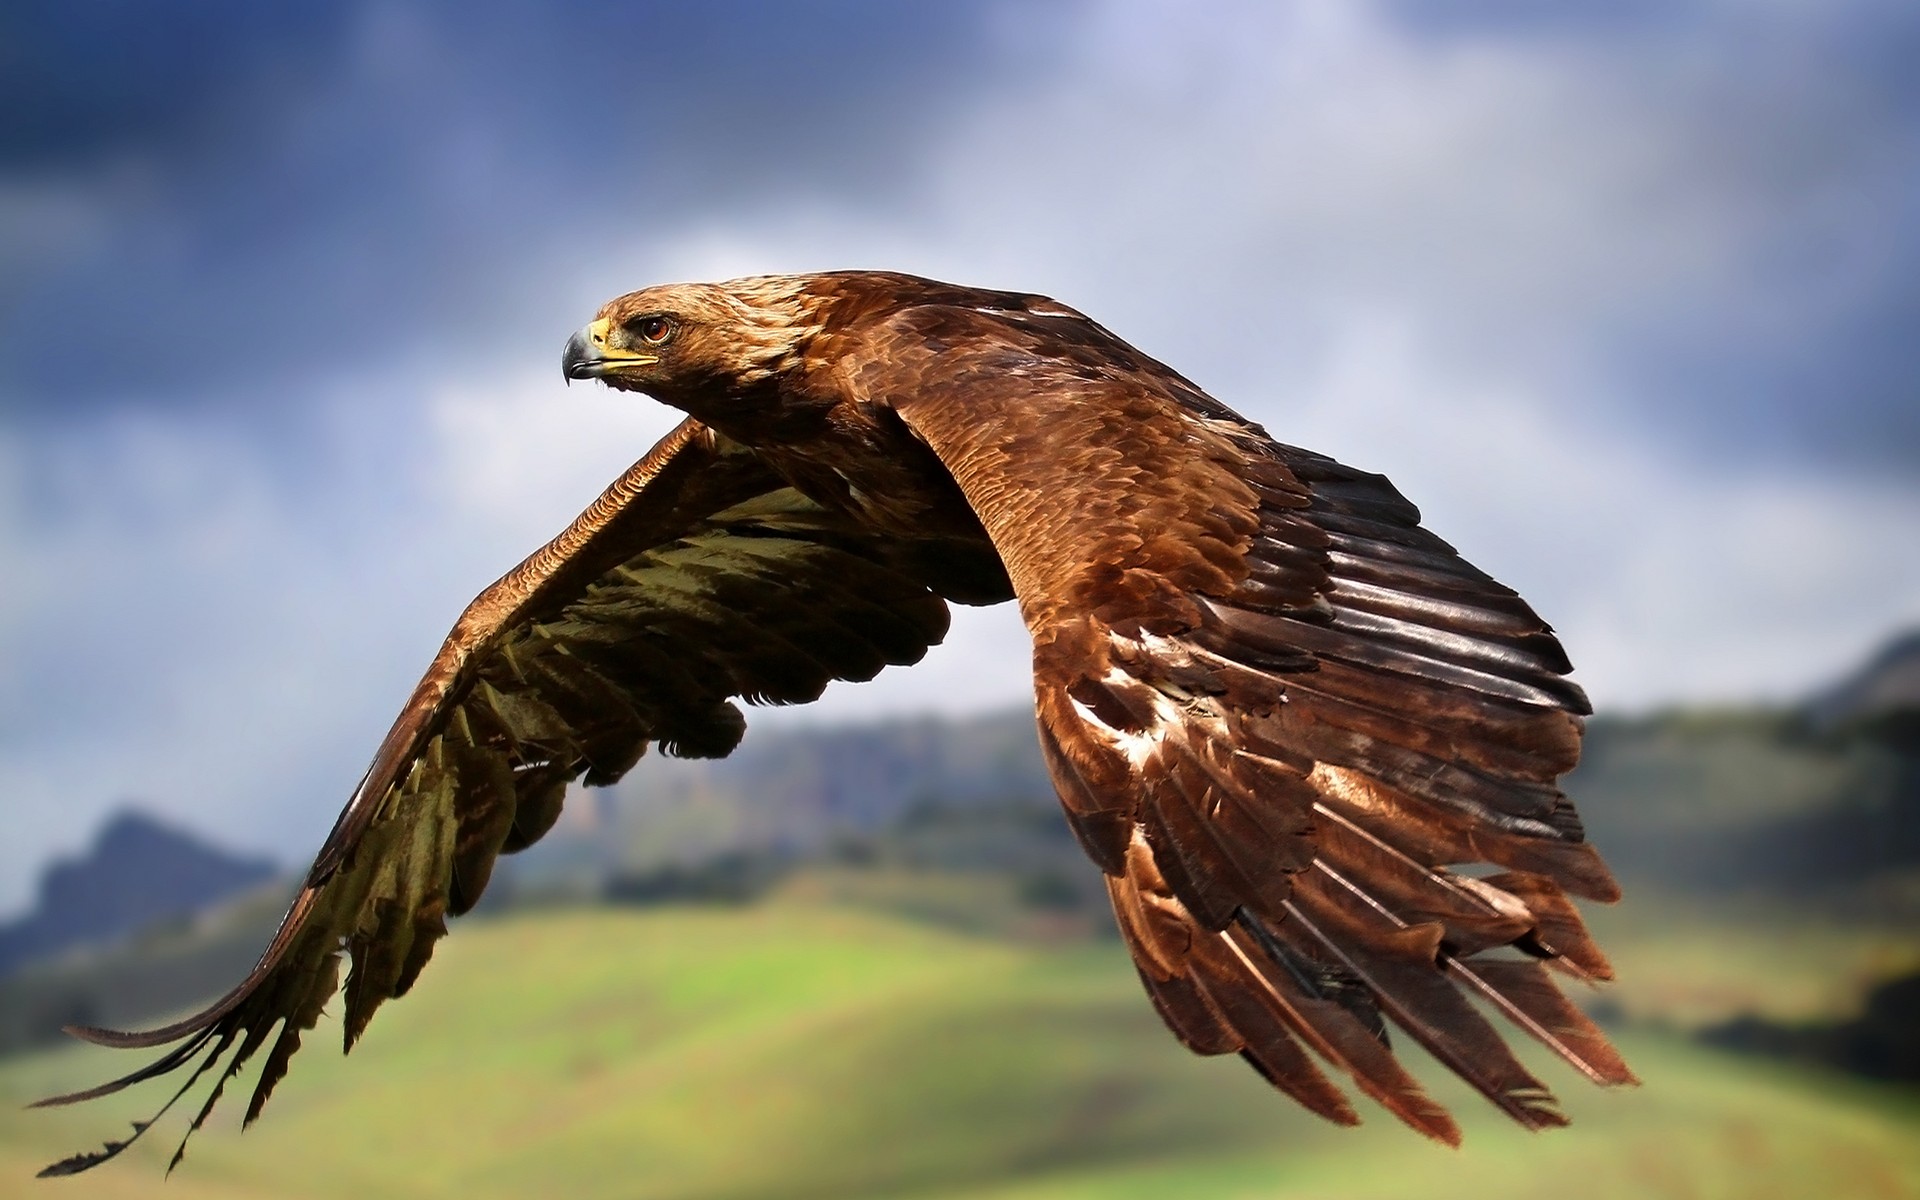 General 1920x1200 eagle animals birds flying wings beak blurred blurry background closeup nature sky landscape clouds